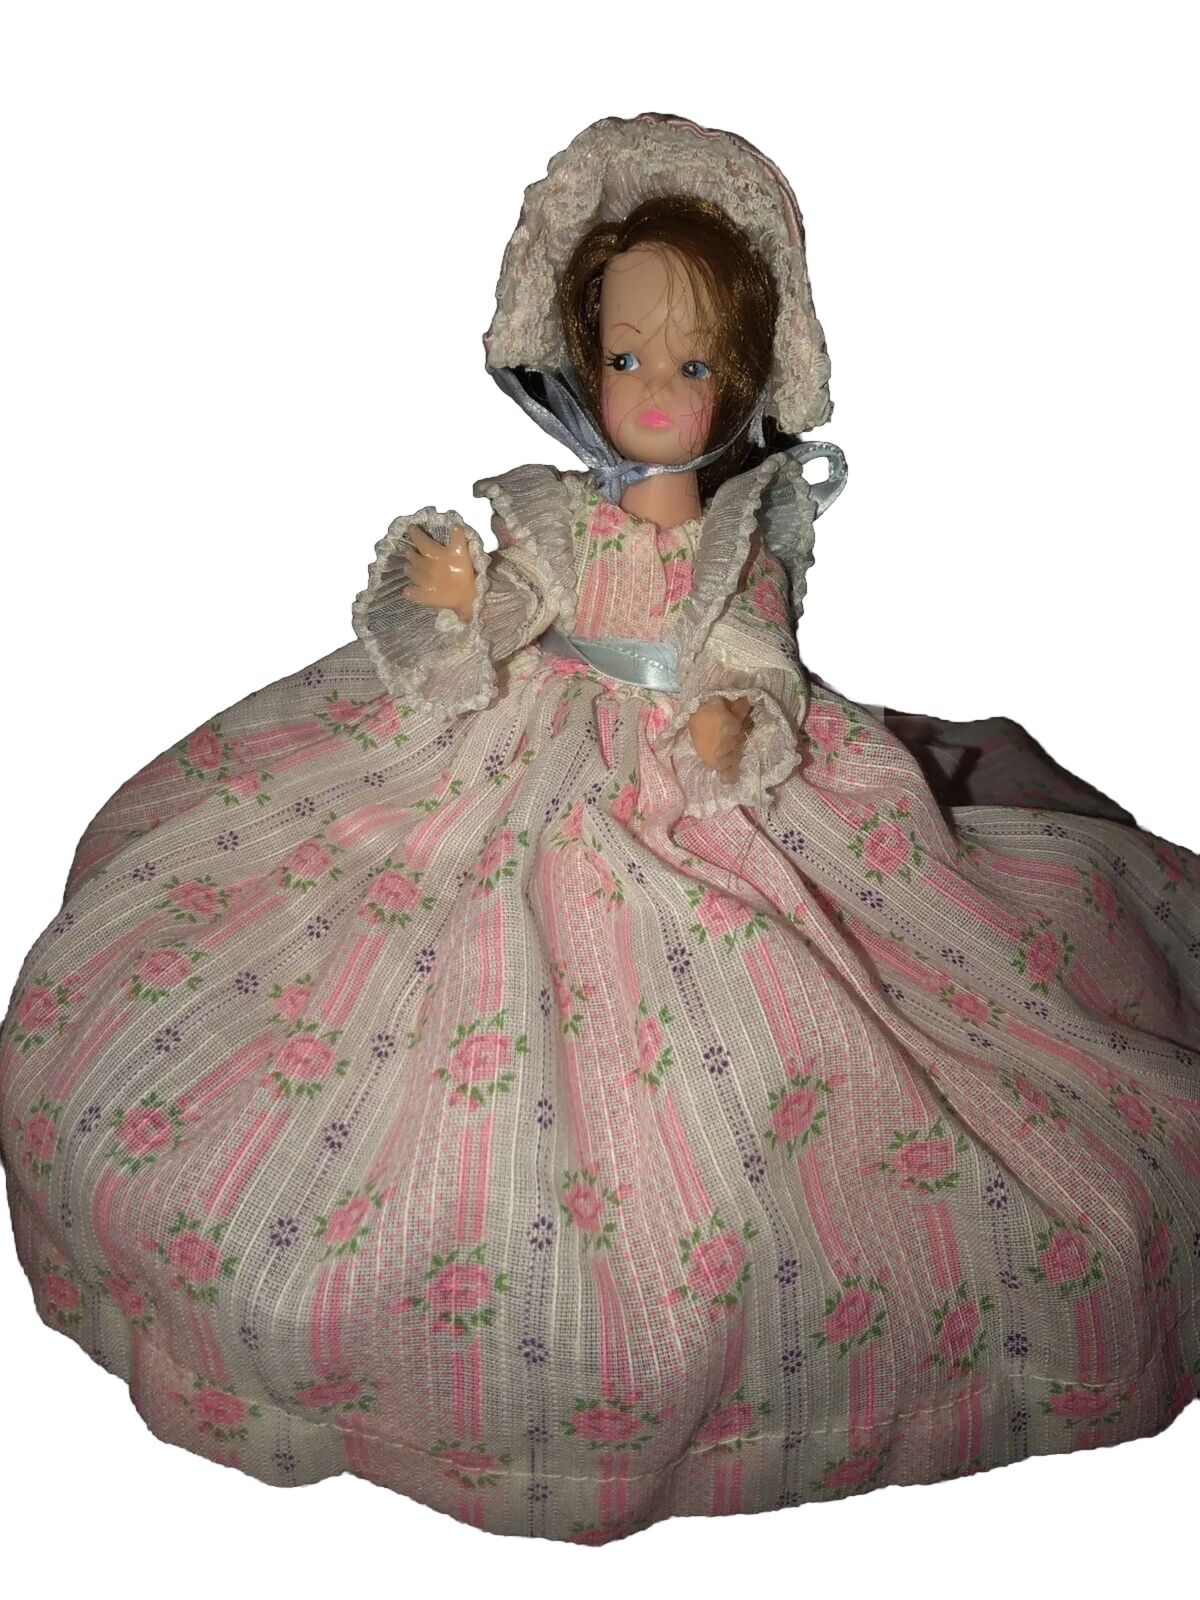 Vintage Doll Beautiful Hand Made Dress and Bonnet made in Hong Kong